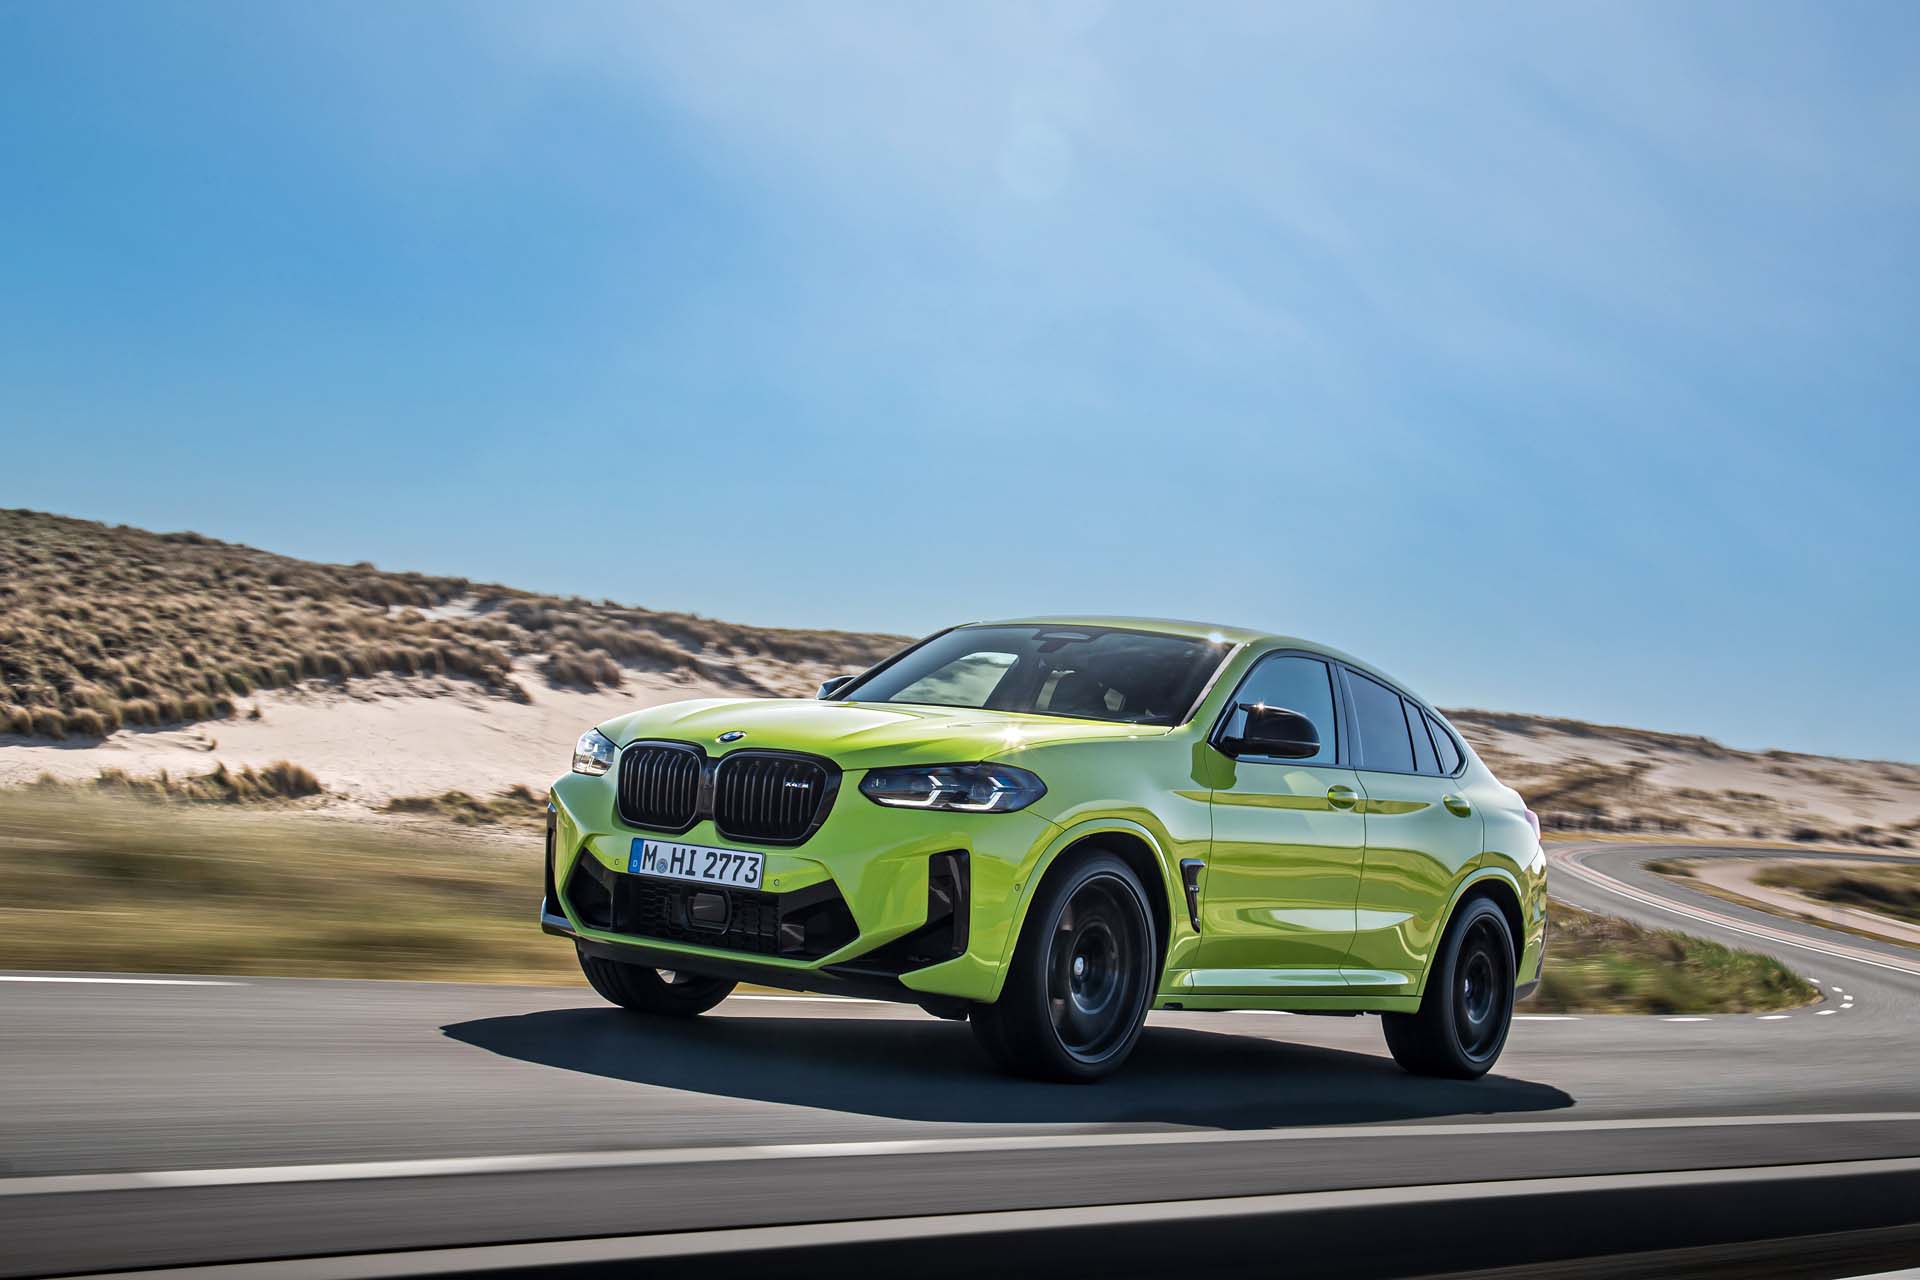 Preview: 2022 BMW X4 keeps looks, adds tech